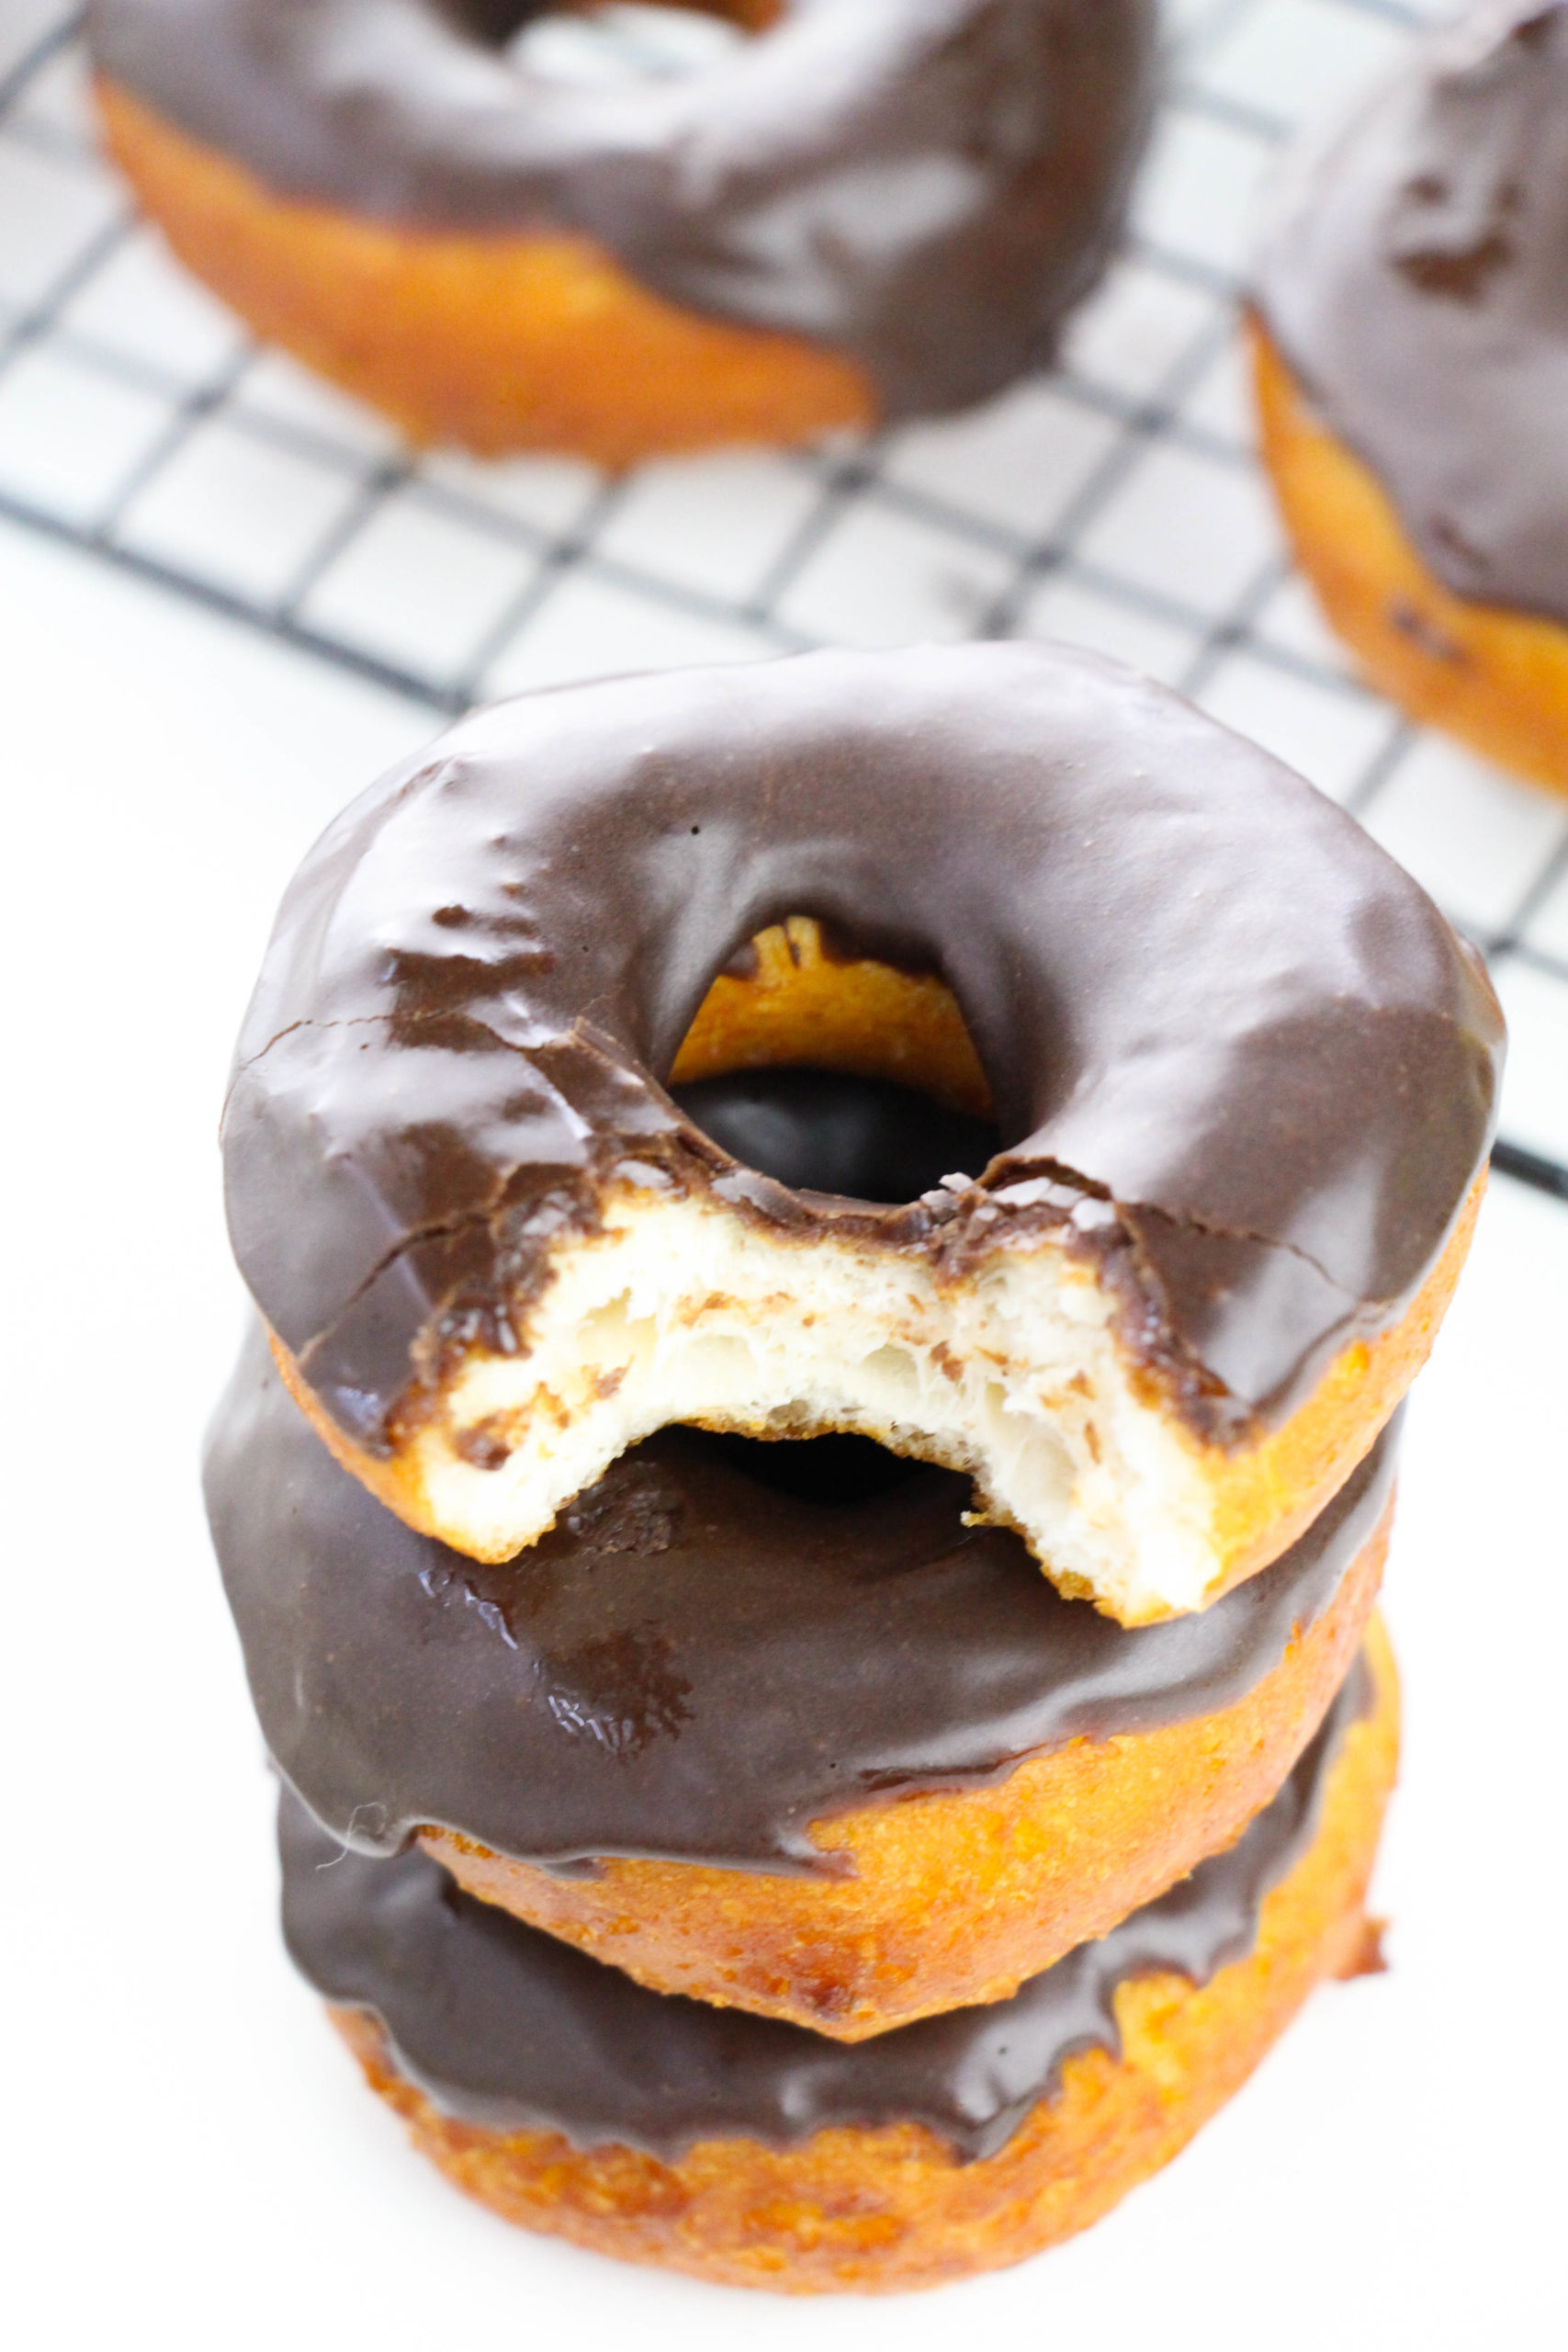 A stack of Chocolate Glazed Biscuit Donuts with a bite taken out.